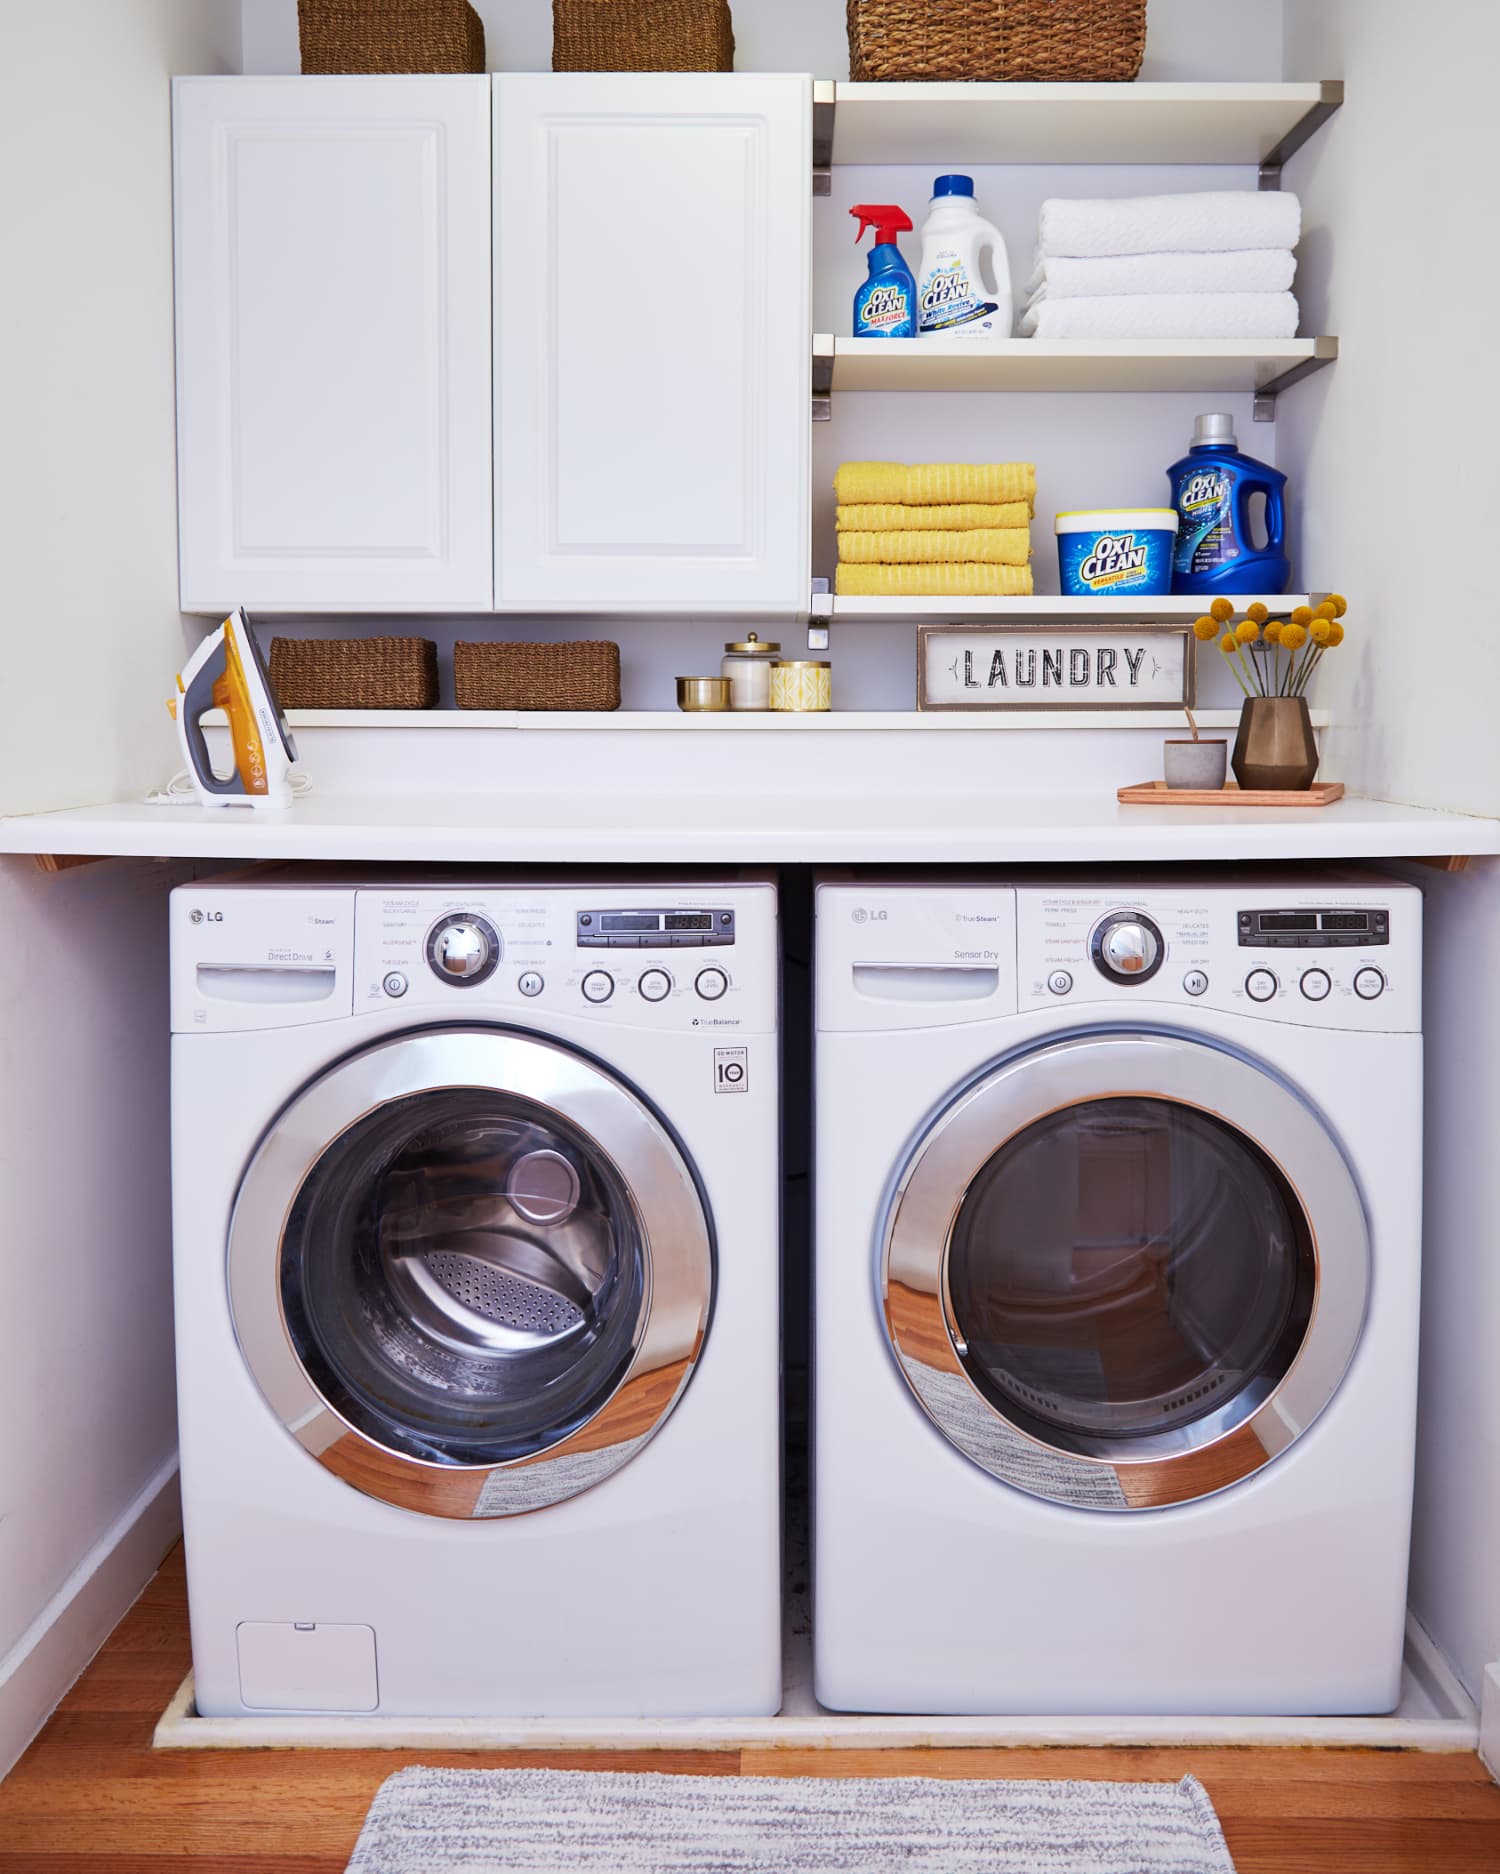 How to Start Loving Your Laundry Room | Apartment Therapy